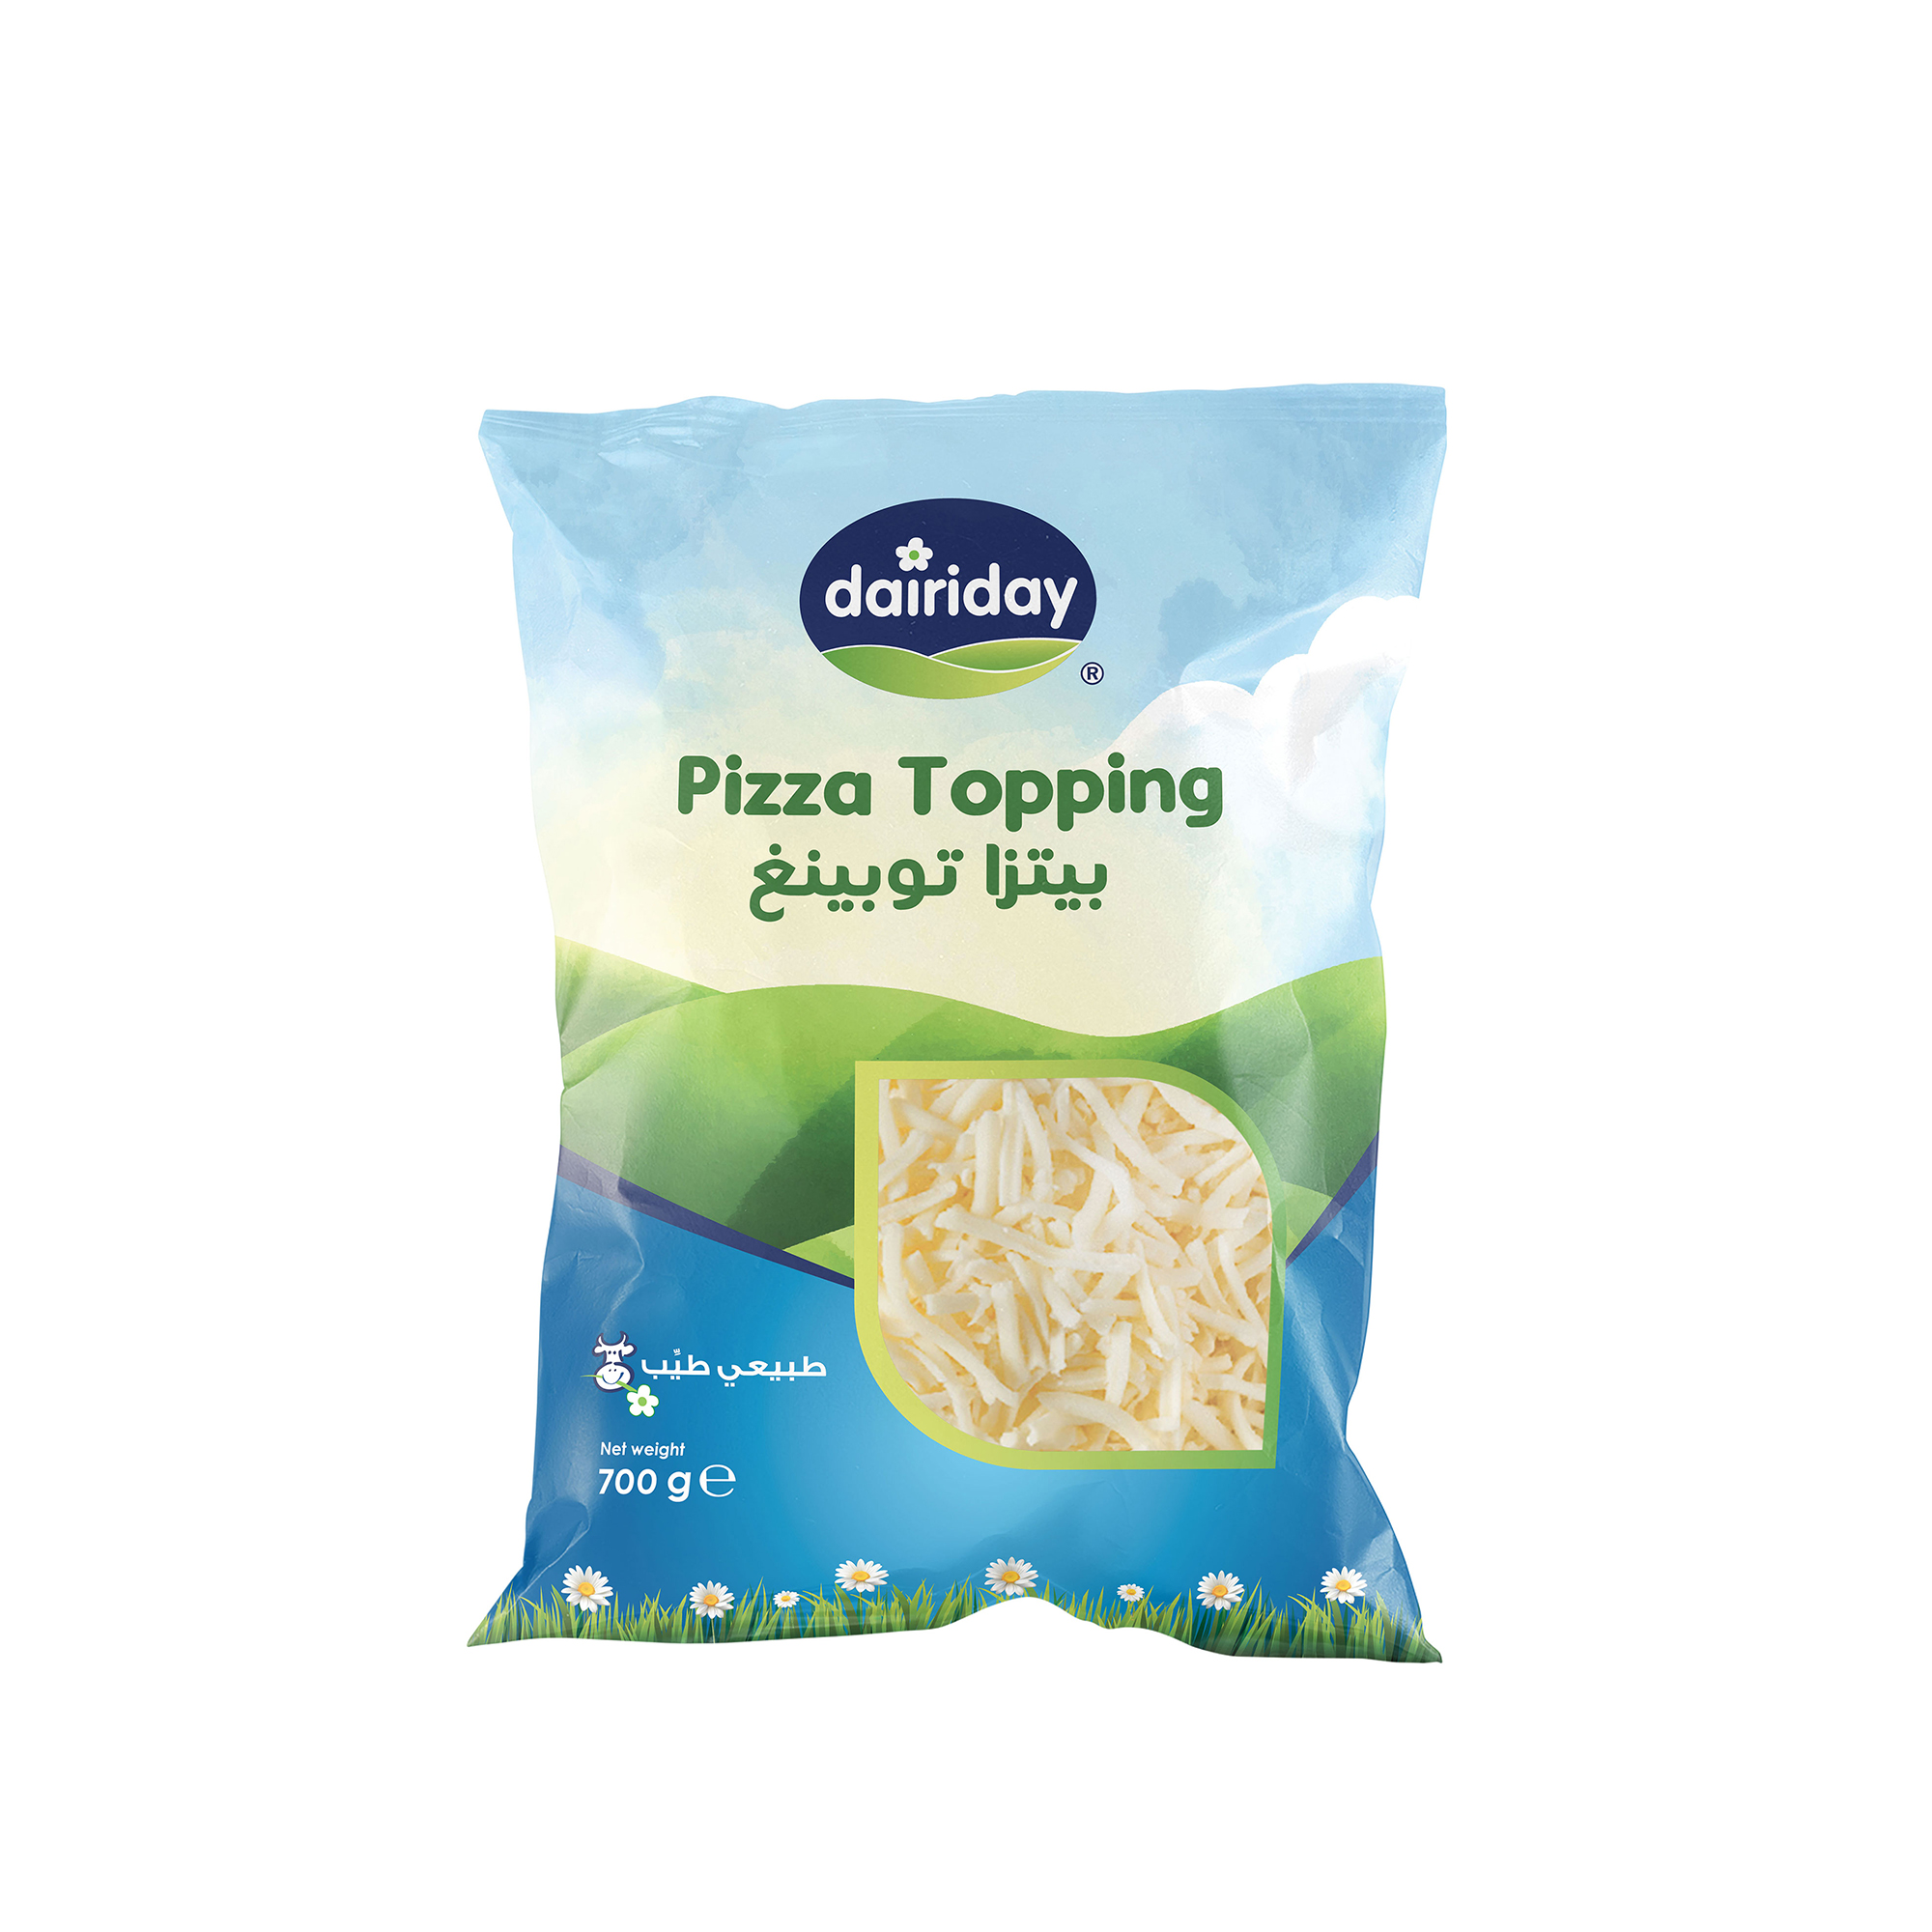 Dairiday-Shredded-Pizza-Topping-700g-cheese